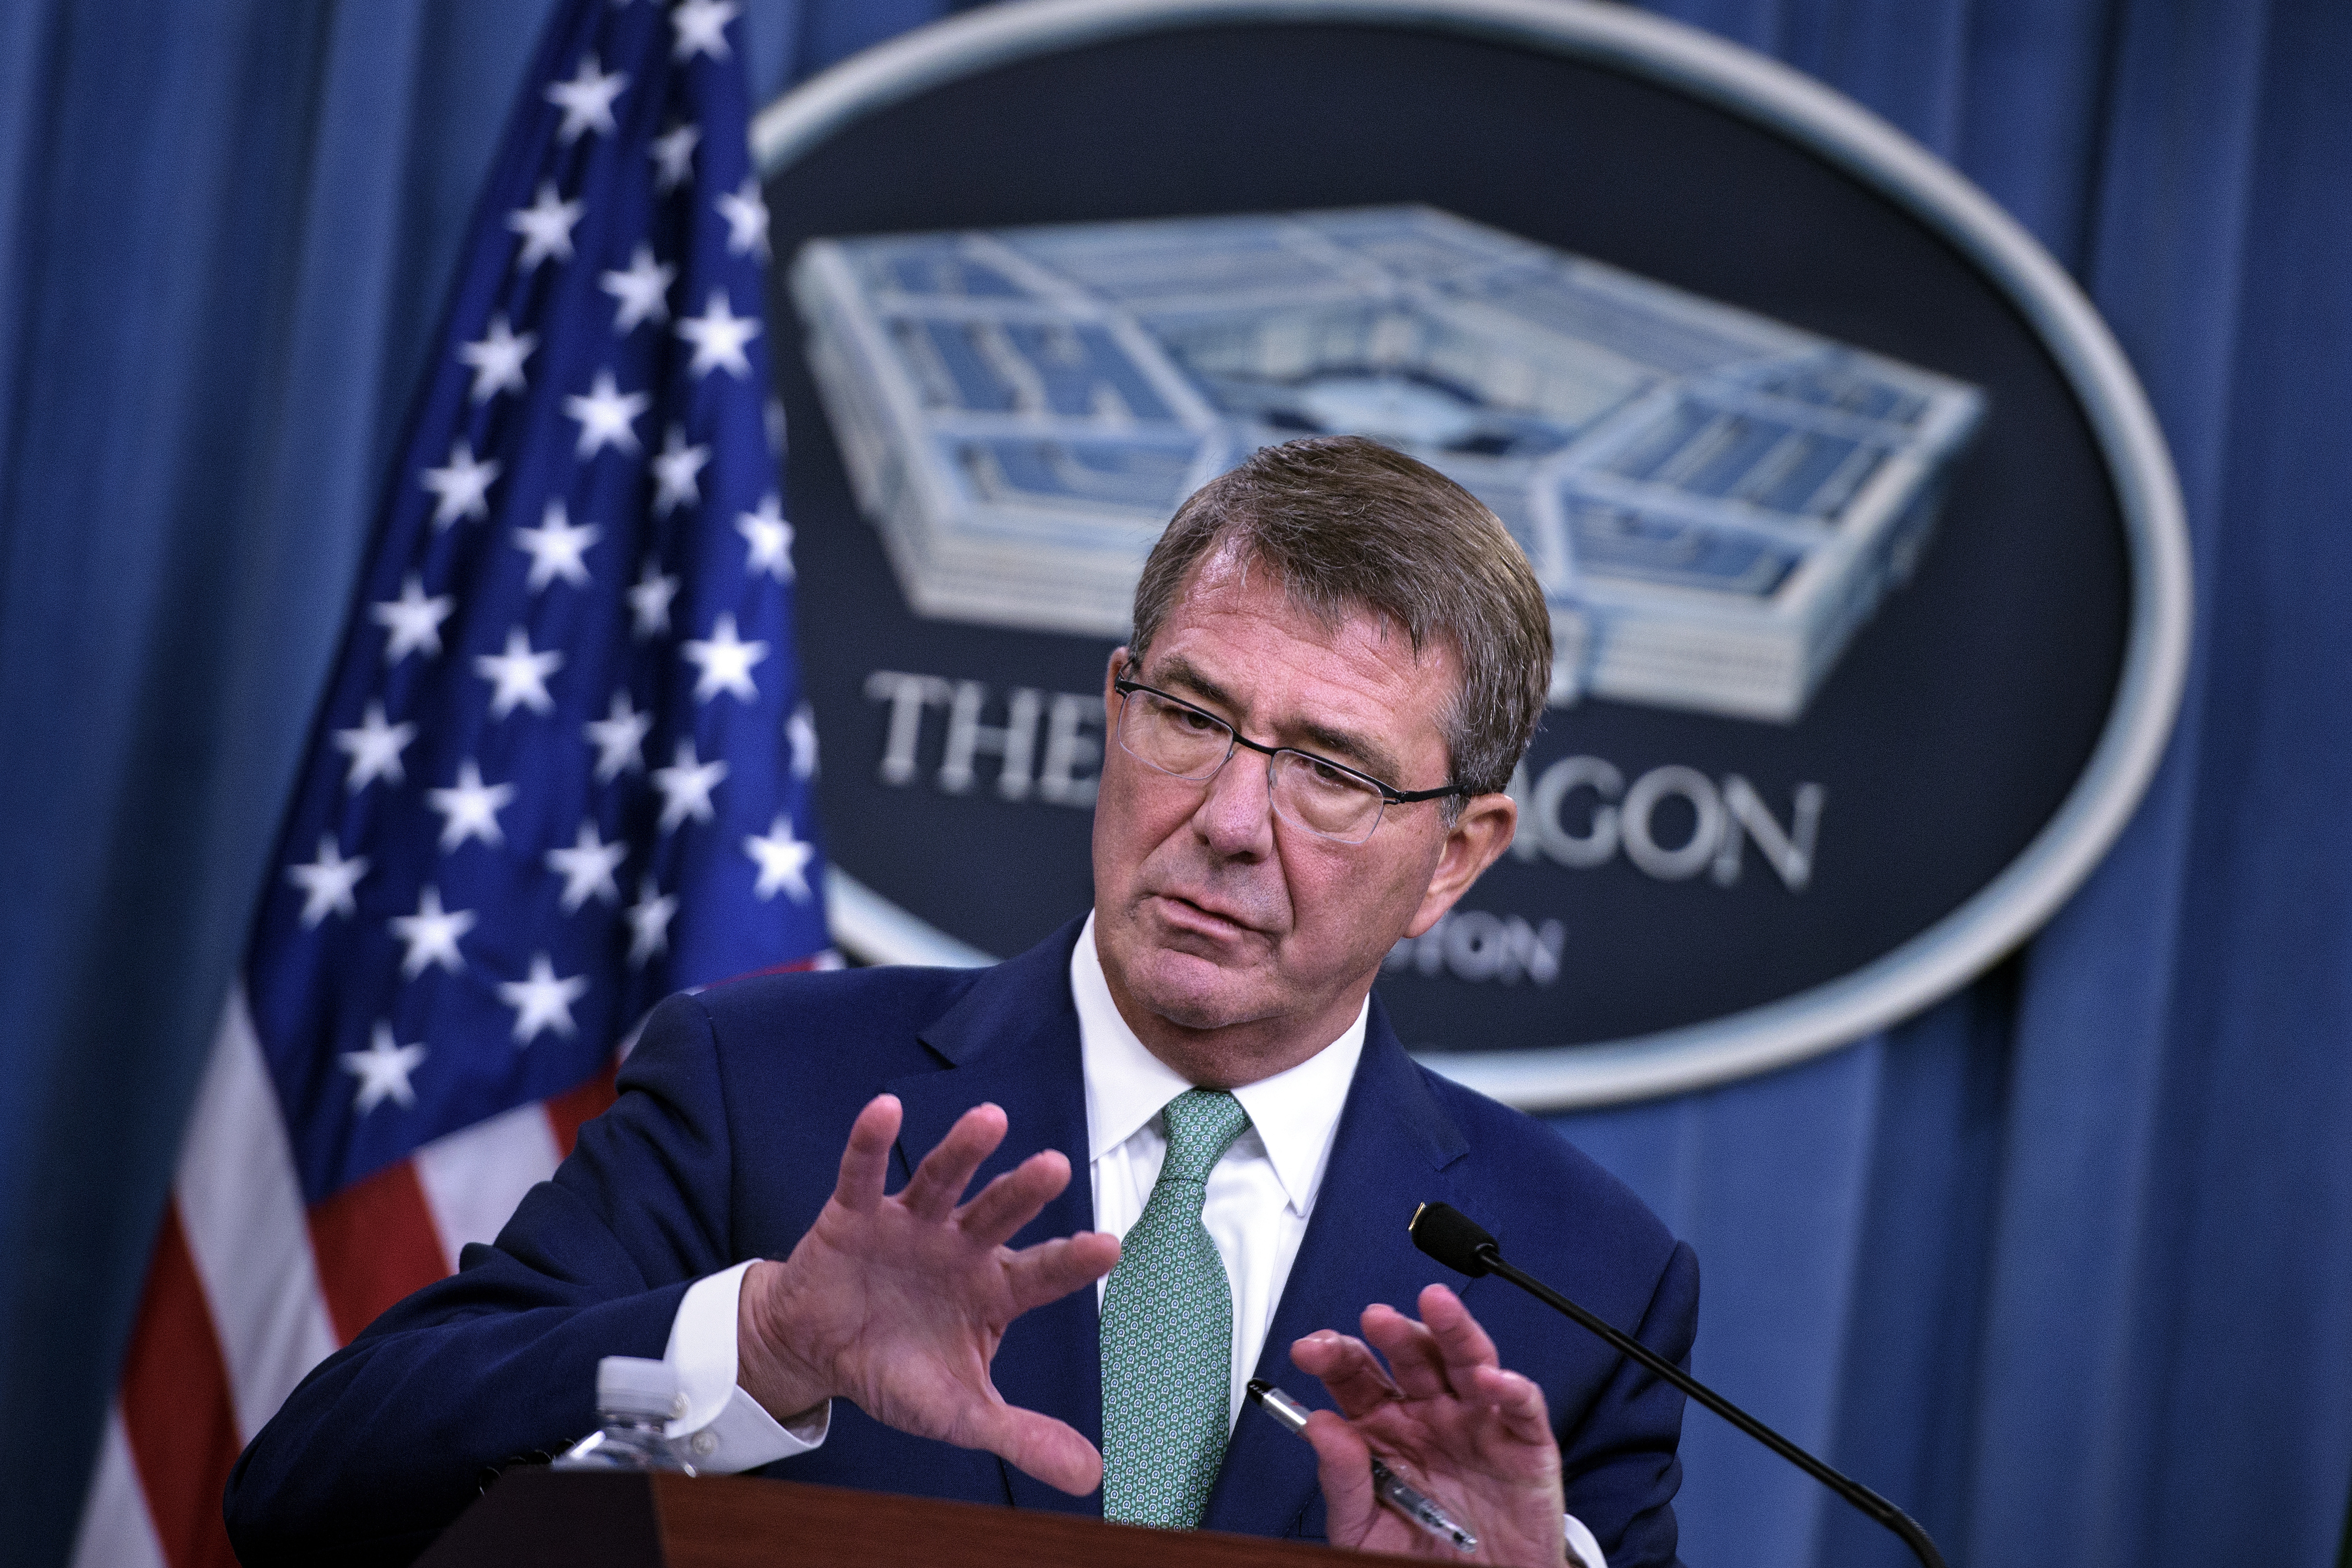 (FILES) This file photo taken on August 29, 2016 shows US Secretary of Defense Ashton Carter  during a press conference with India's Minister of Defence Manohar Parrikar at the Pentagon in Washington, DC. Russia could be more willing to deploy nuclear weapons today than the Soviet Union ever was during the Cold War, US Defense Secretary Ashton Carter warned September 26, 2016. Speaking at Minot Air Force Base in North Dakota near the Canadian border, he accused Moscow of "nuclear saber-rattling," expressing concerns over Russia's push to overhaul its atomic weapons systems.  / AFP PHOTO / Brendan Smialowski